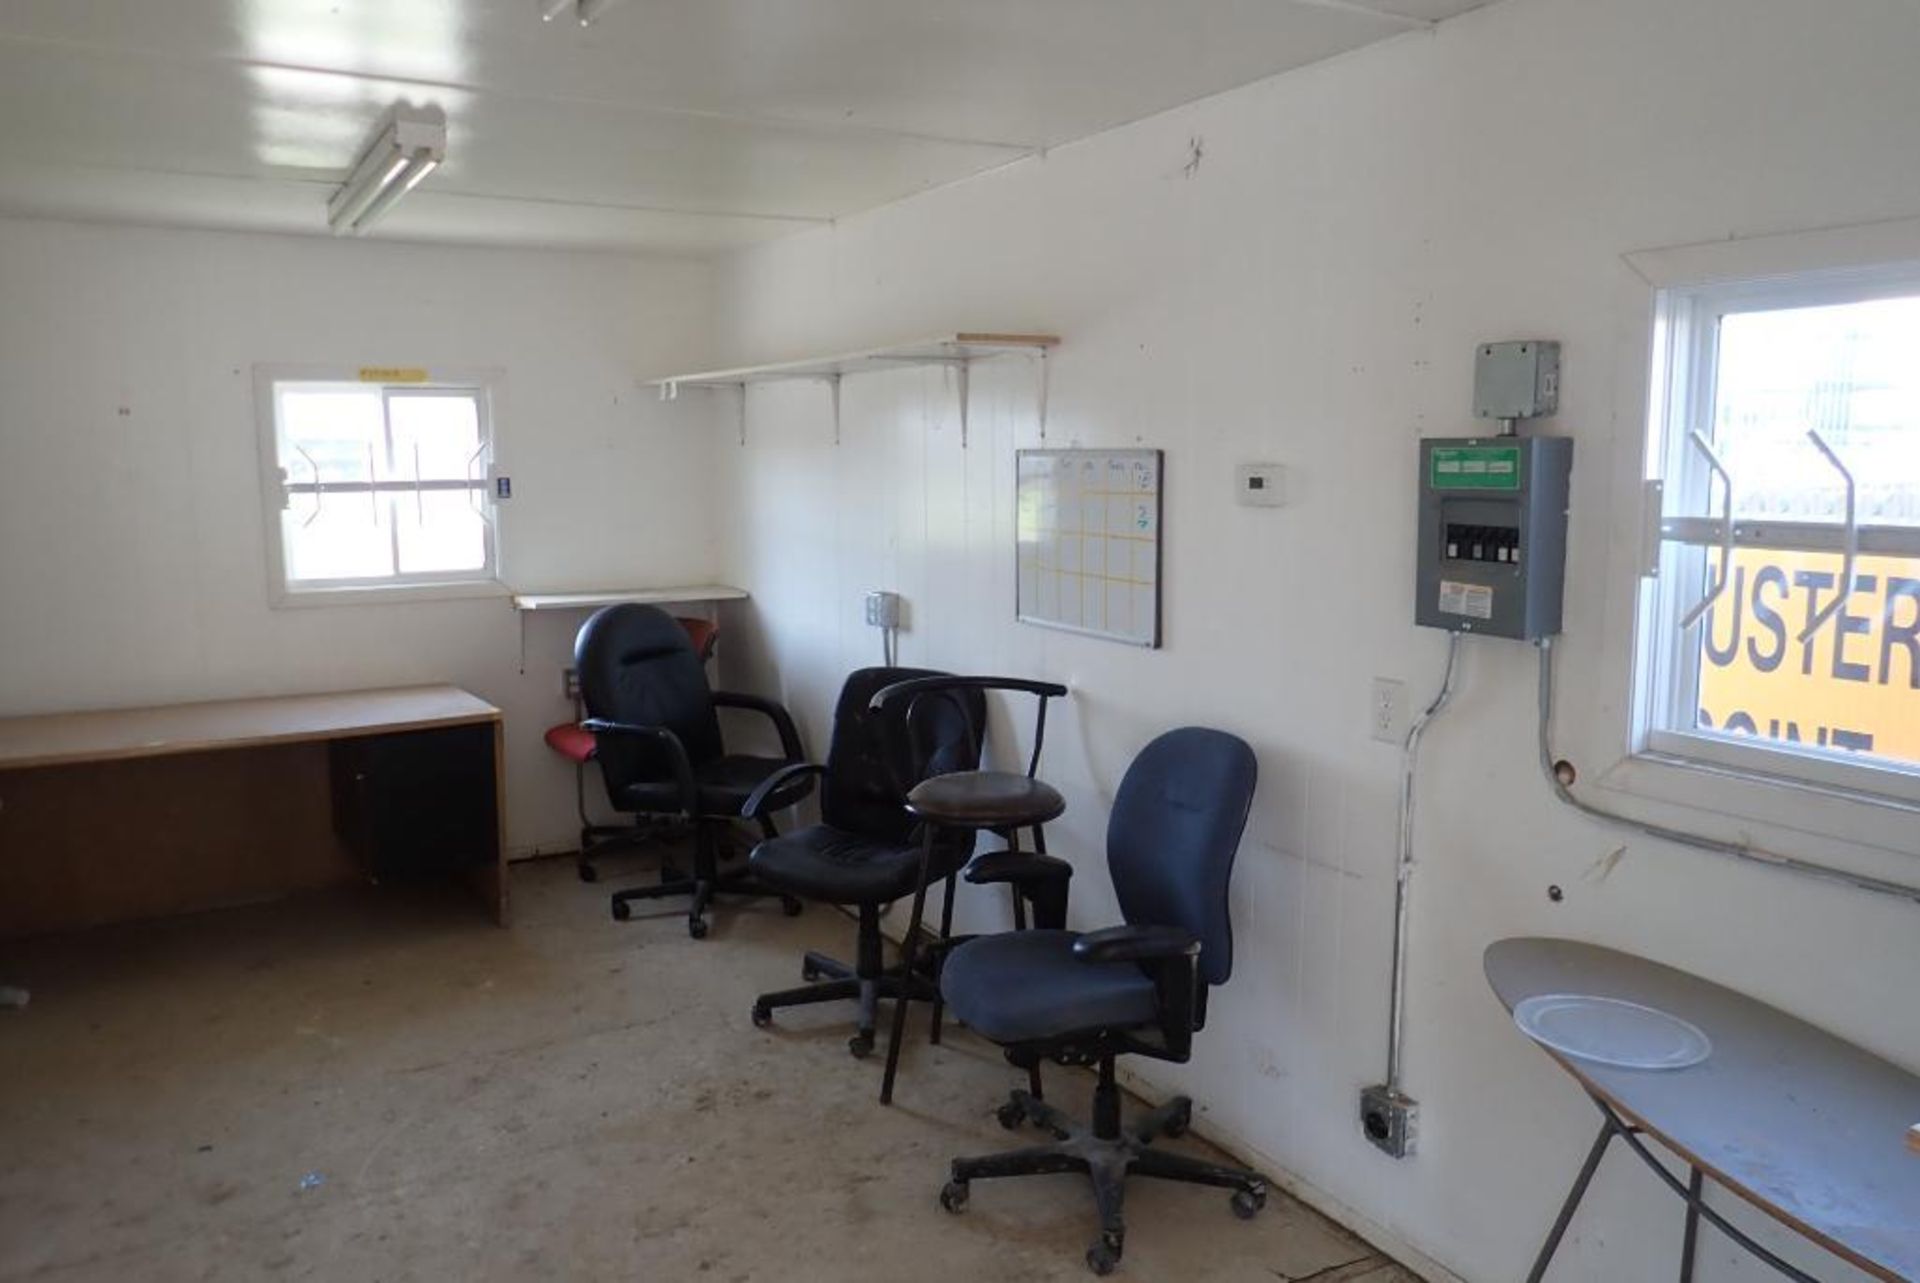 Skidded 32'x10' Office Building w/Furnace and Contents. - Image 4 of 4